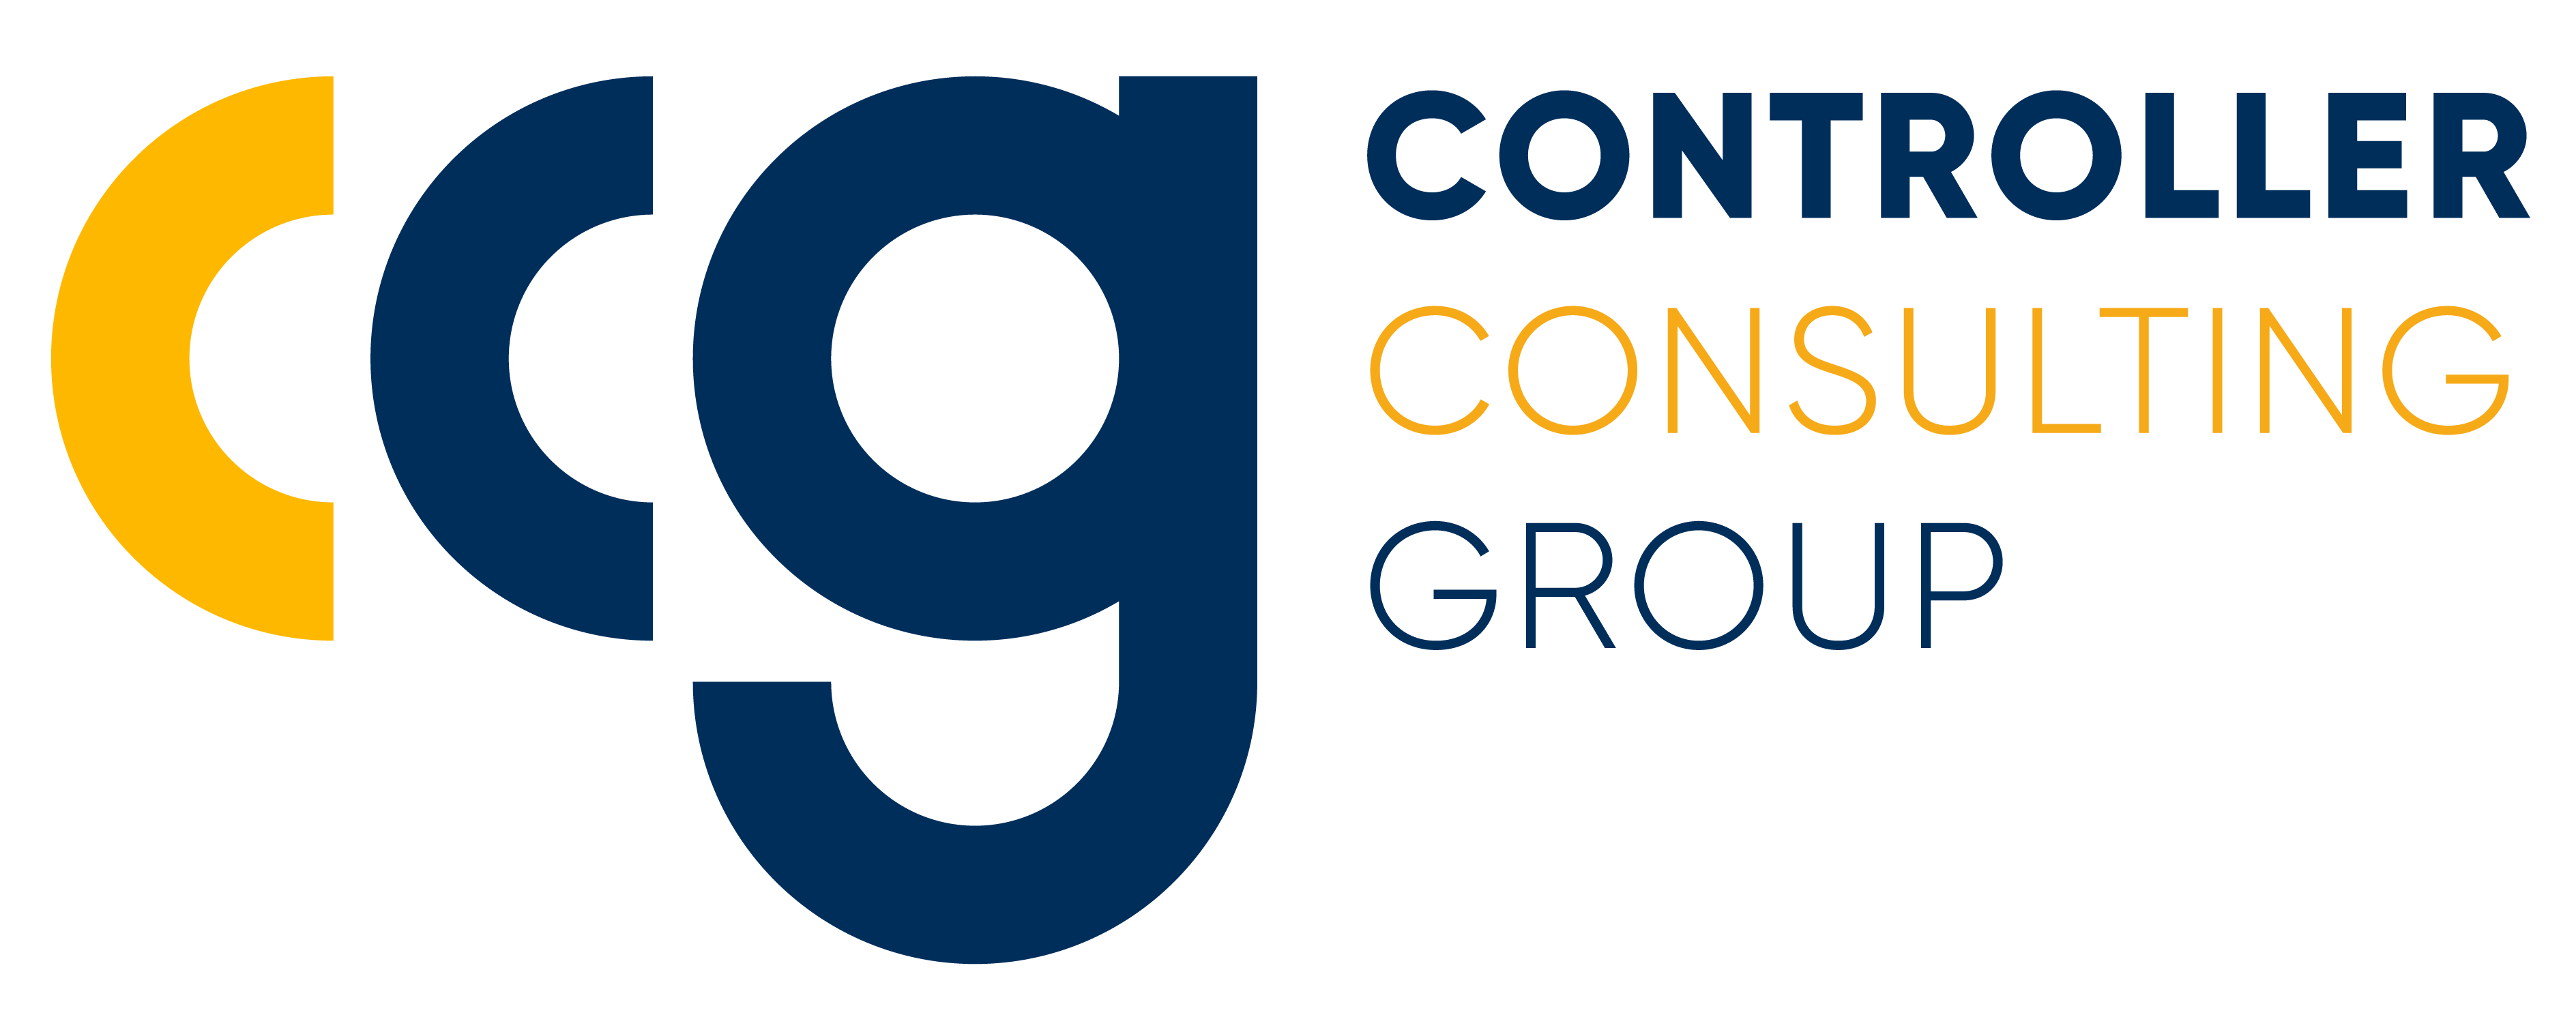 Controller Consulting Group